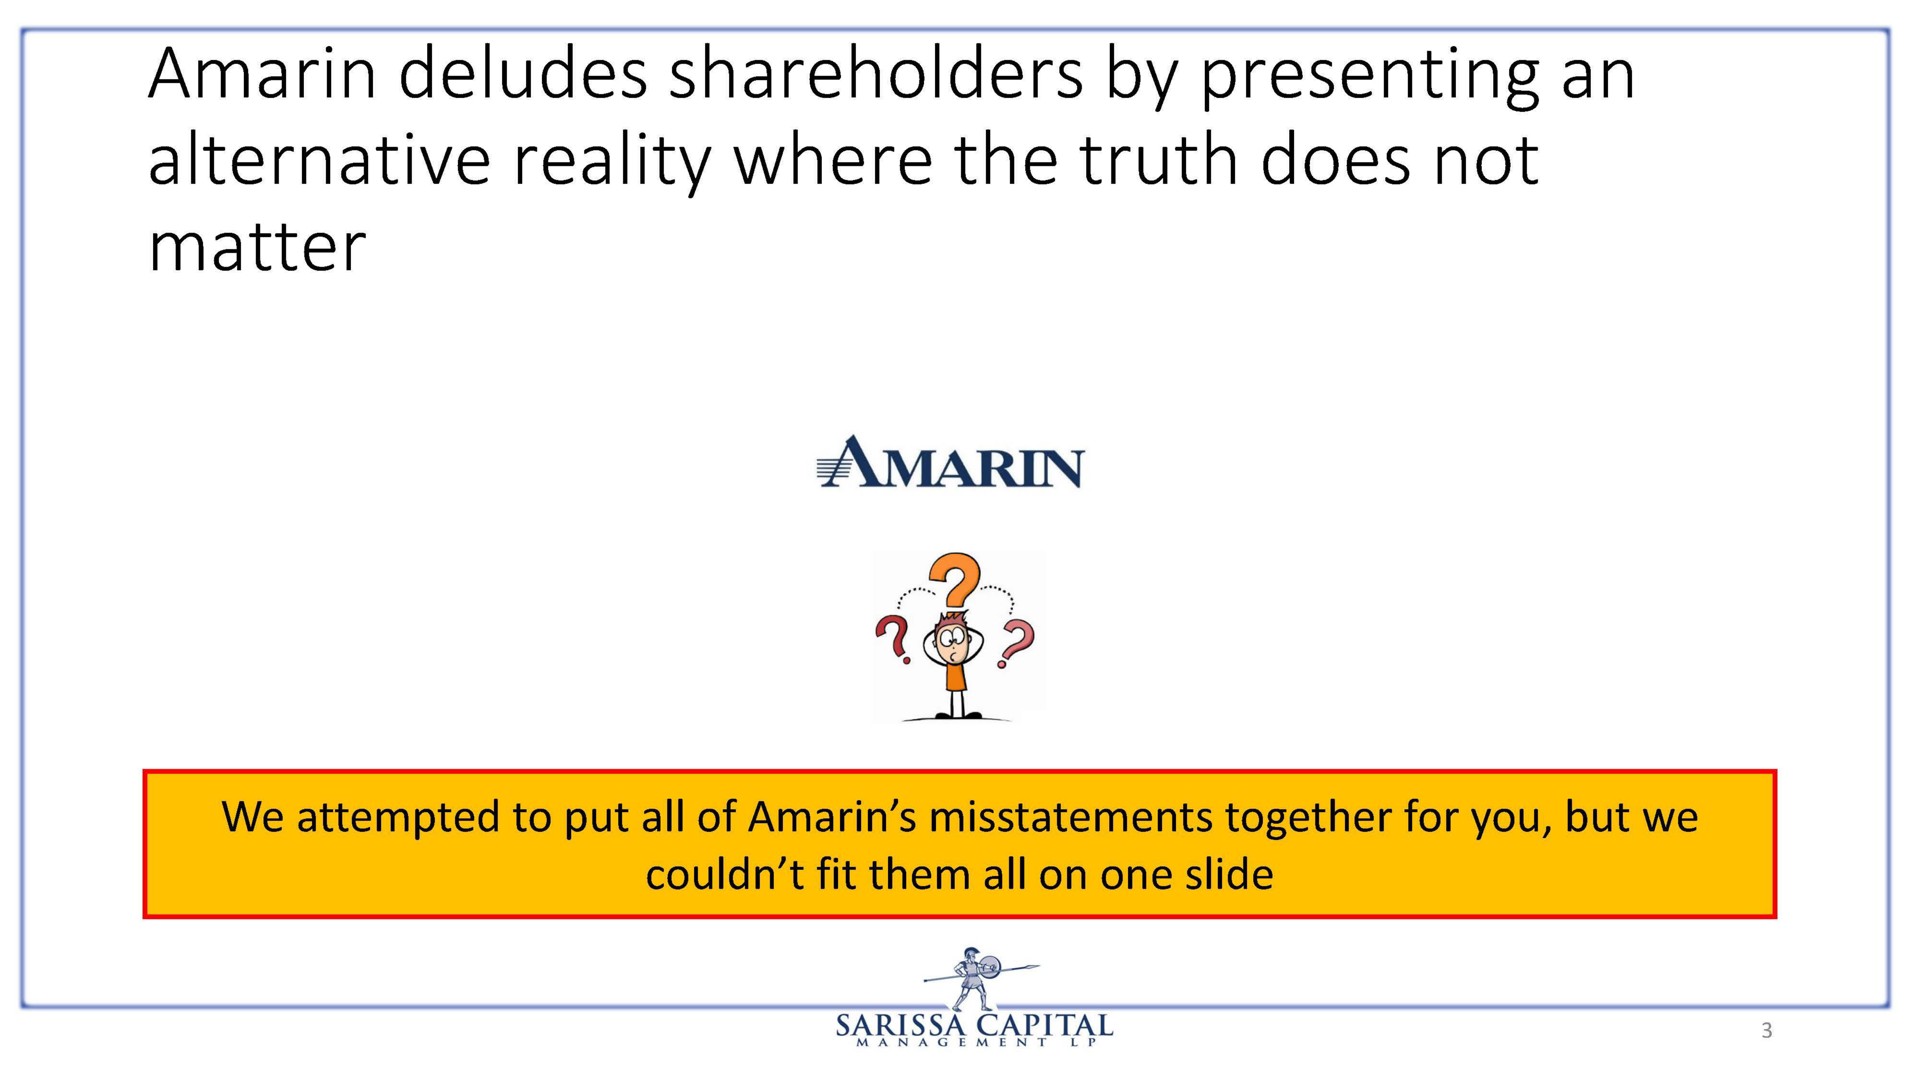 amarin deludes shareholders by presenting an alternative reality where the truth does not matter | Sarissa Capital